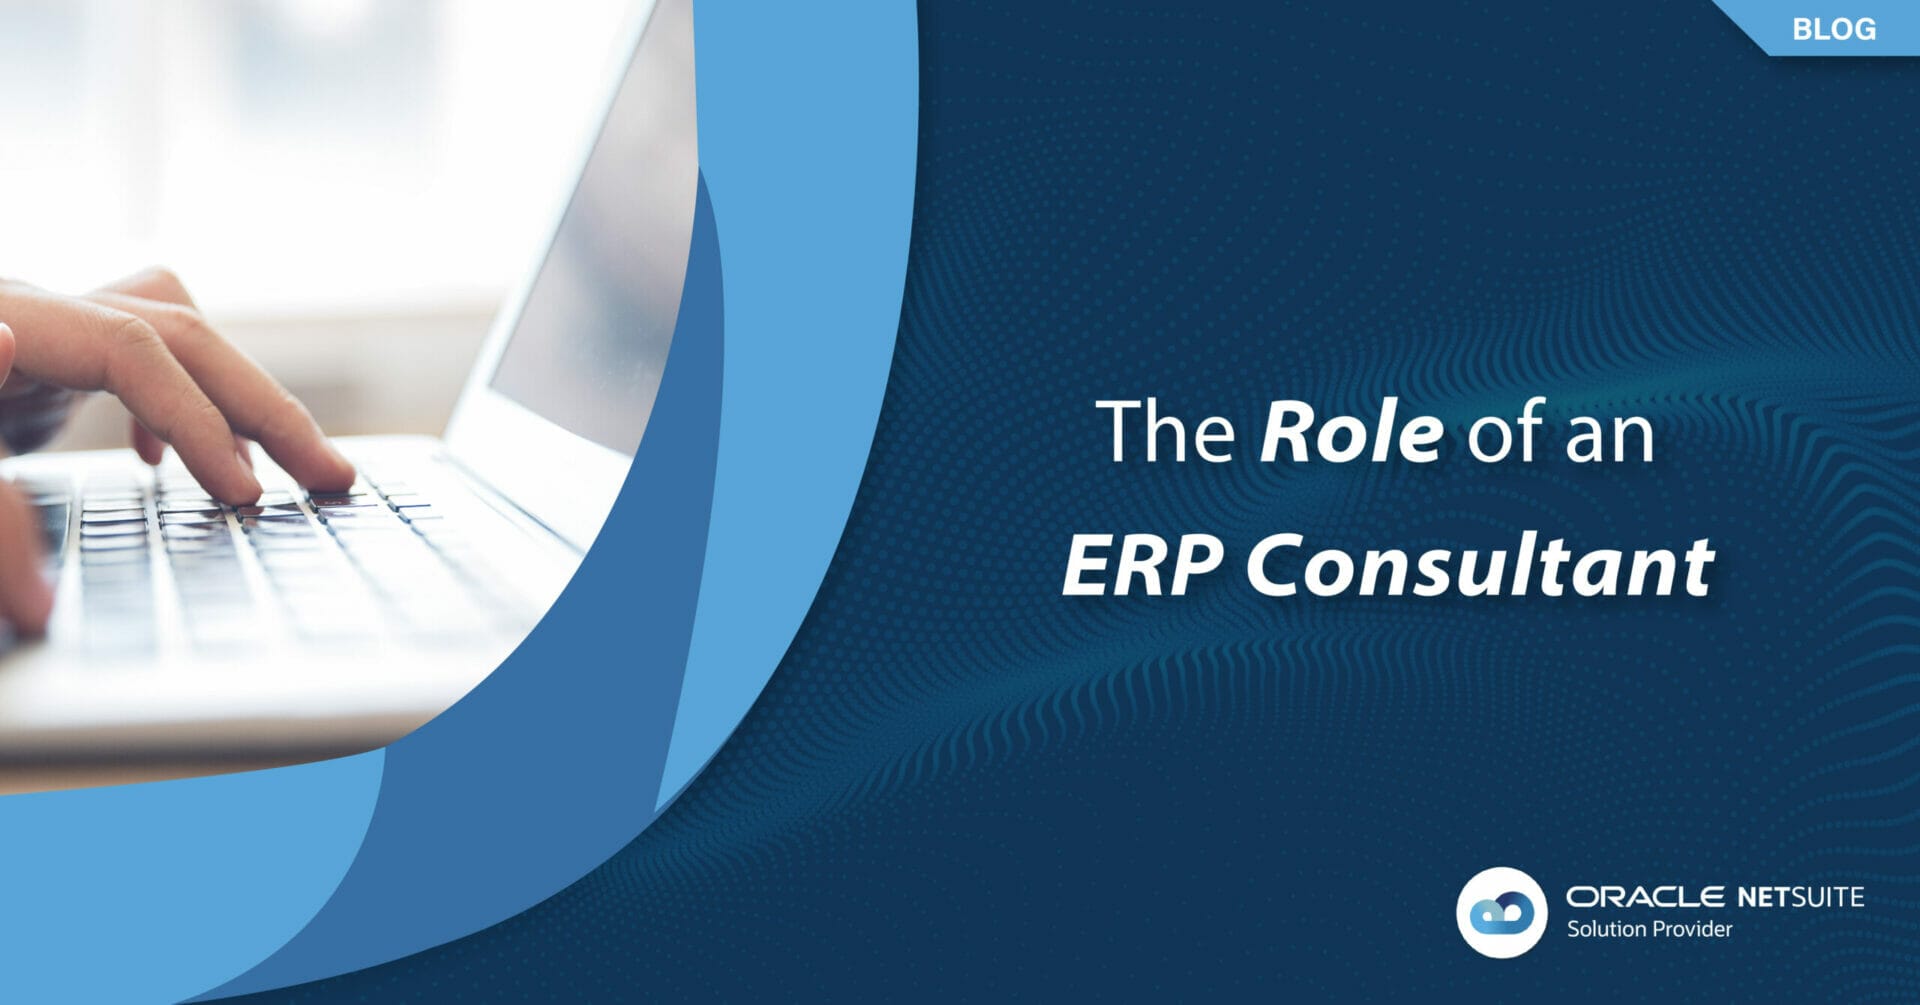 The Role of an ERP Consultant